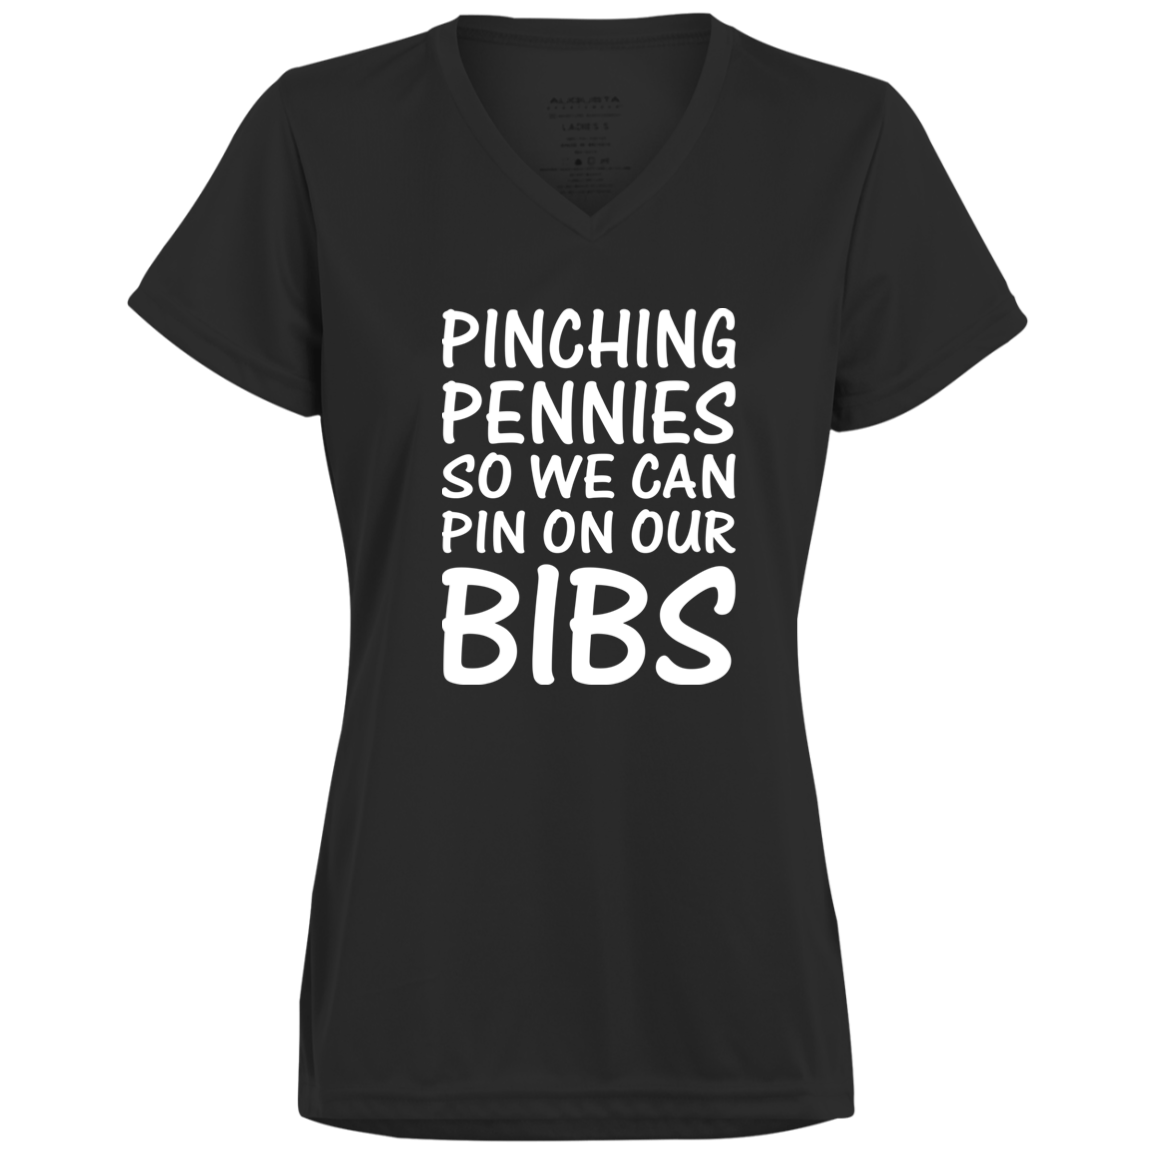 Women's Inspirational Top Pinching pennies so we can pin on our bibs